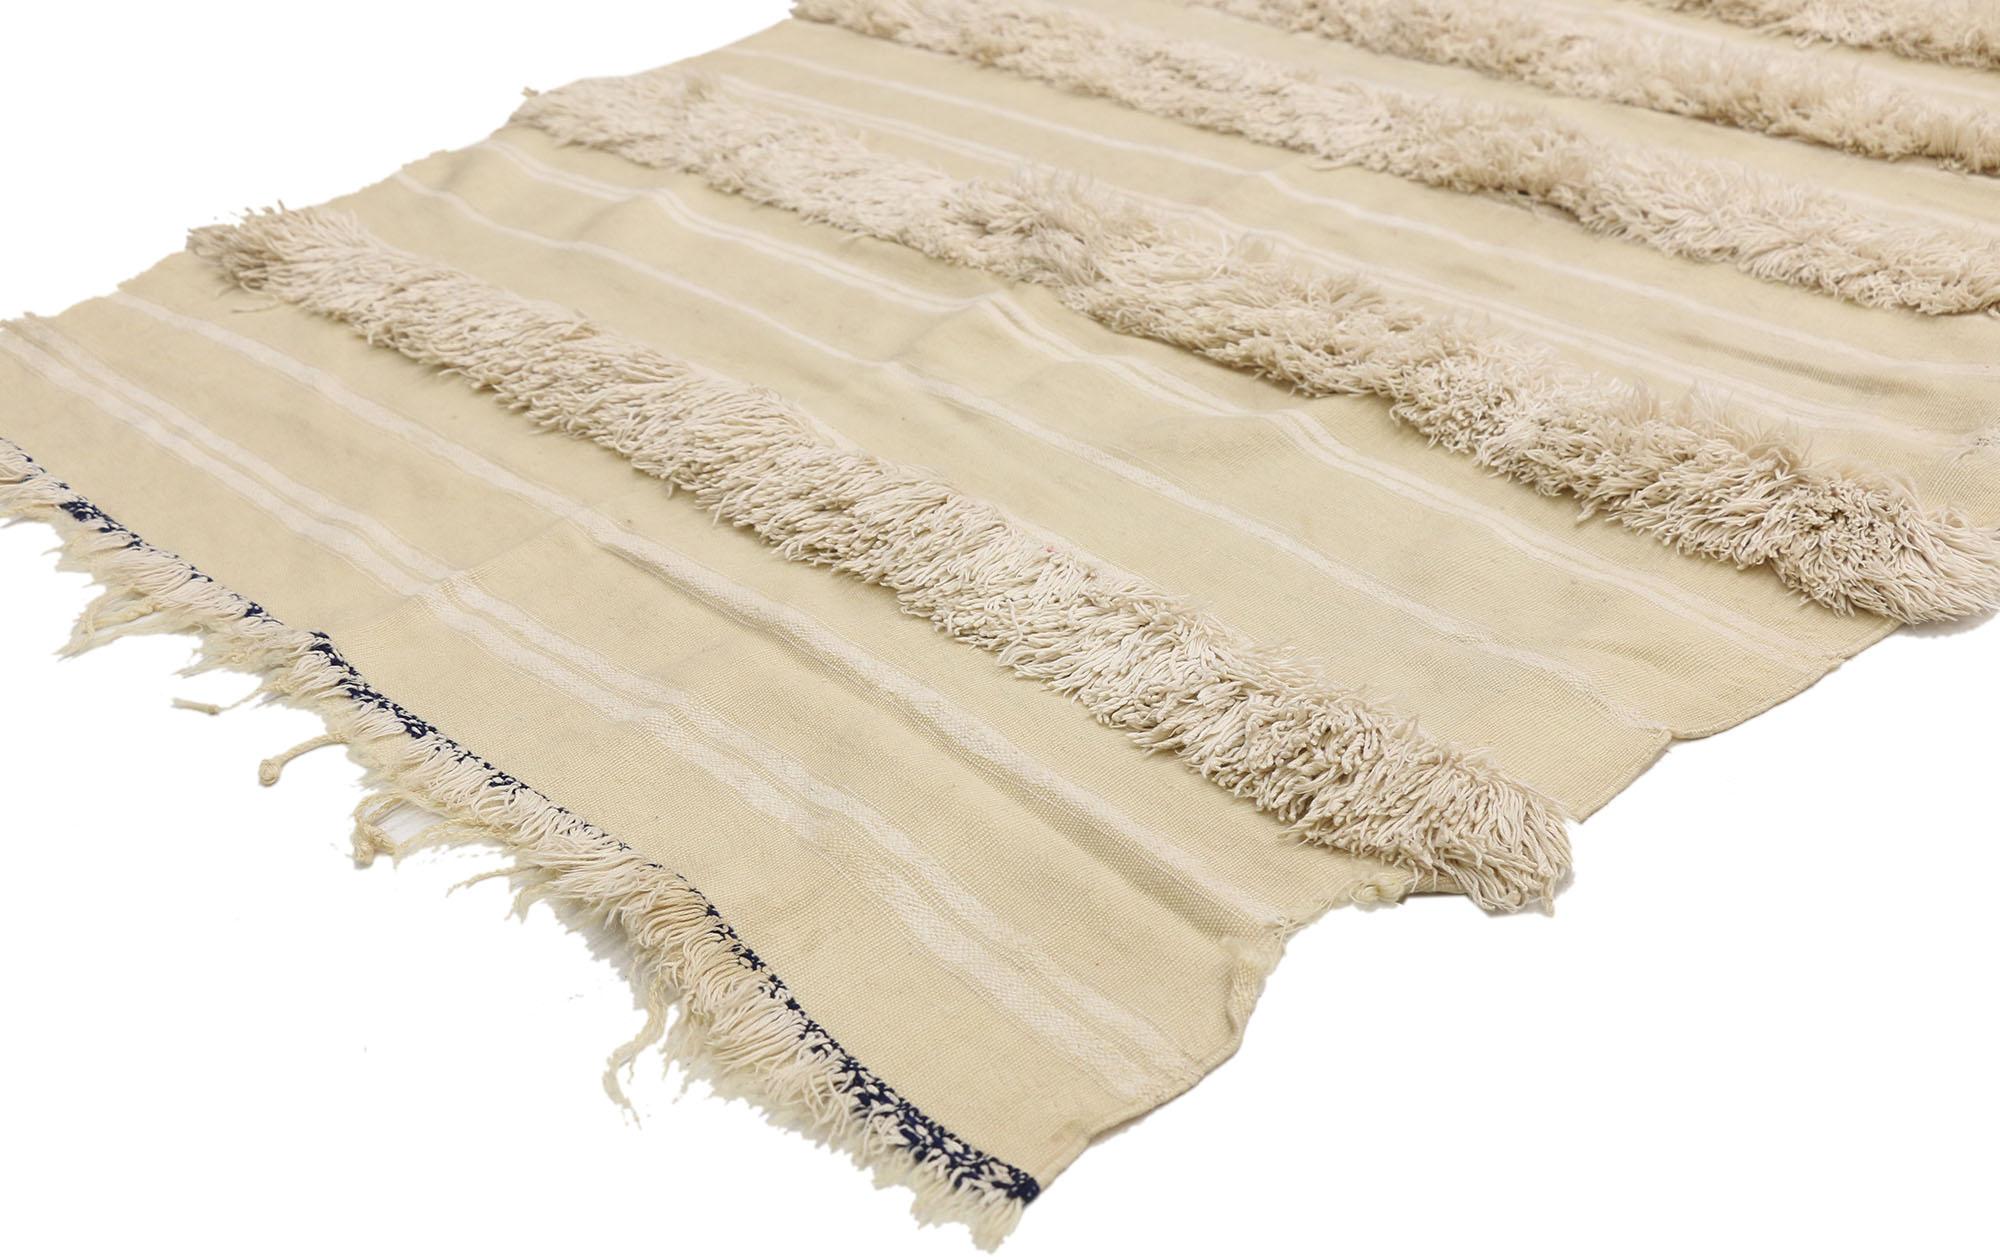 20824, vintage Moroccan wedding blanket, Berber Handira Tamizart. This handwoven wool vintage Moroccan wedding blanket also known as a Berber Handira features rows of fluffy fringe embellished with accent colors. The underside of this vintage